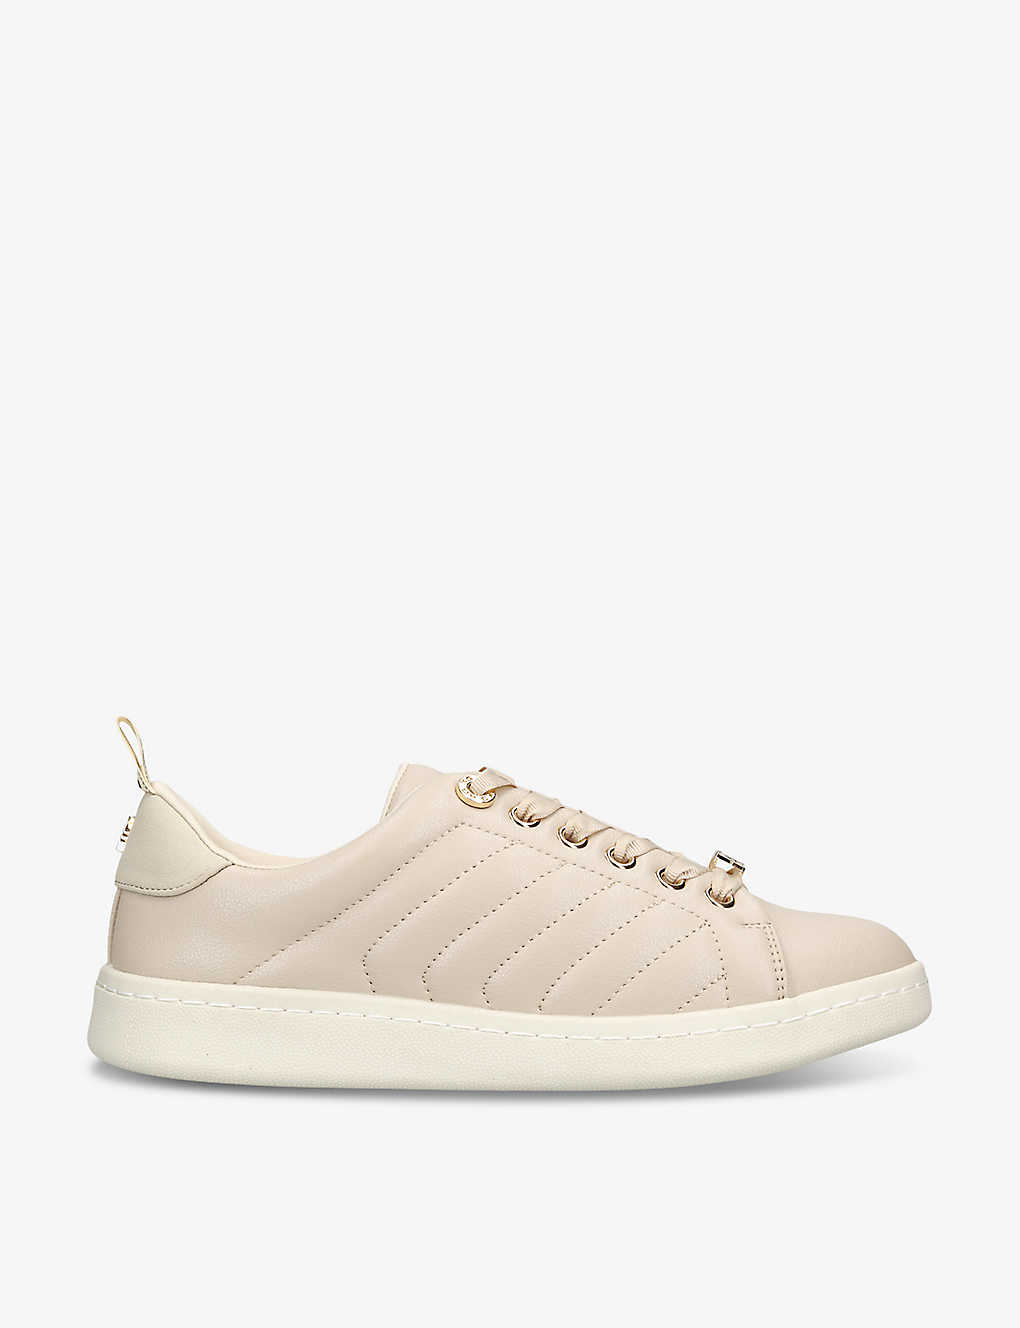 Kg Kurt Geiger Womens Blush Liza Quilted Faux-leather Low-top Trainers